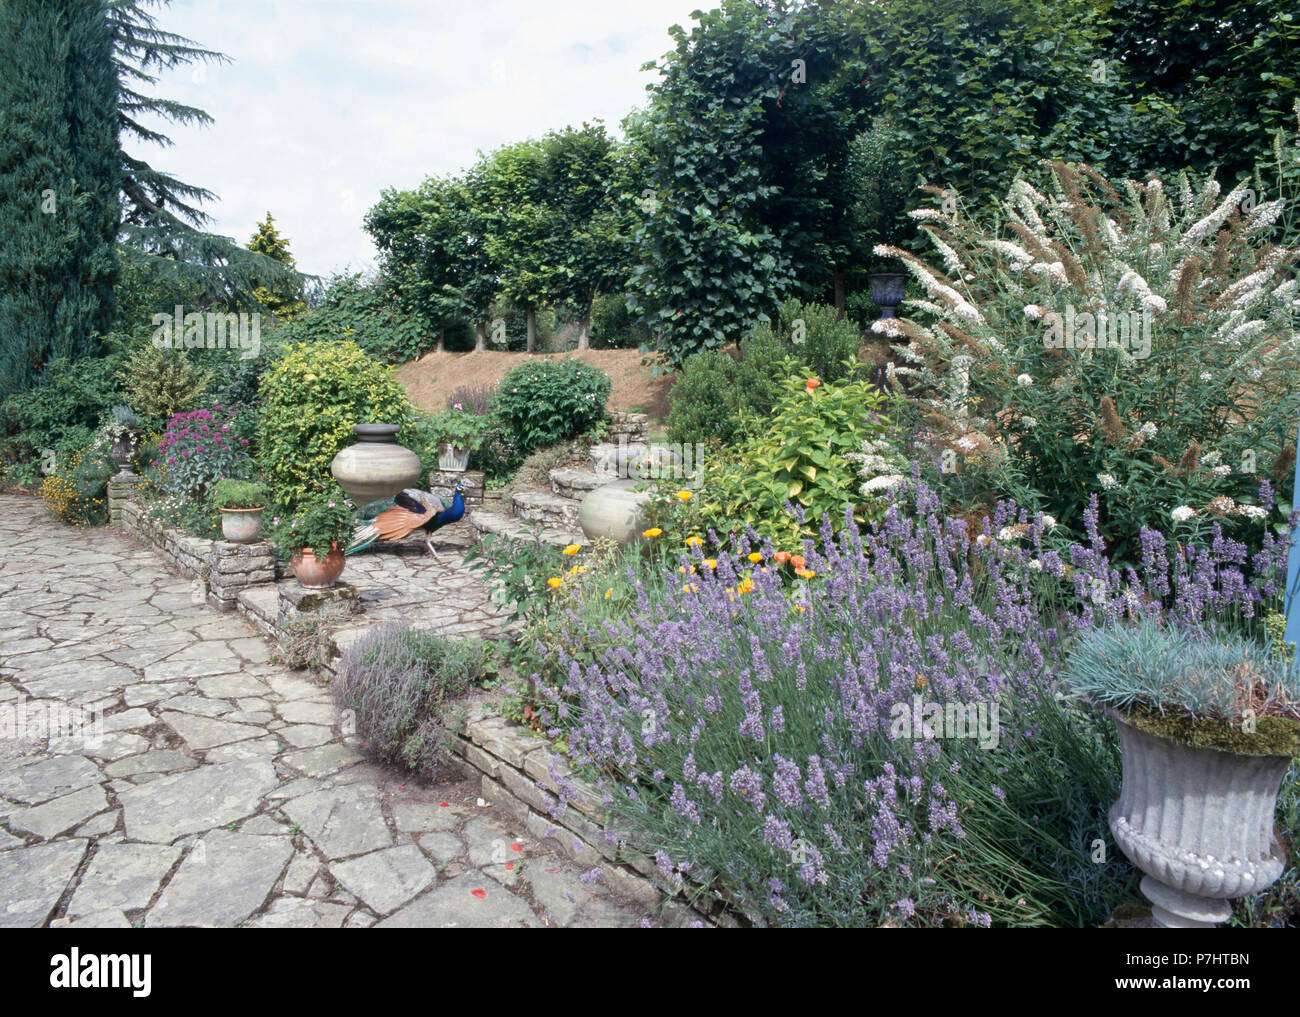 Lavender growing in border in large country garden with crazy-paving path Stock Photo